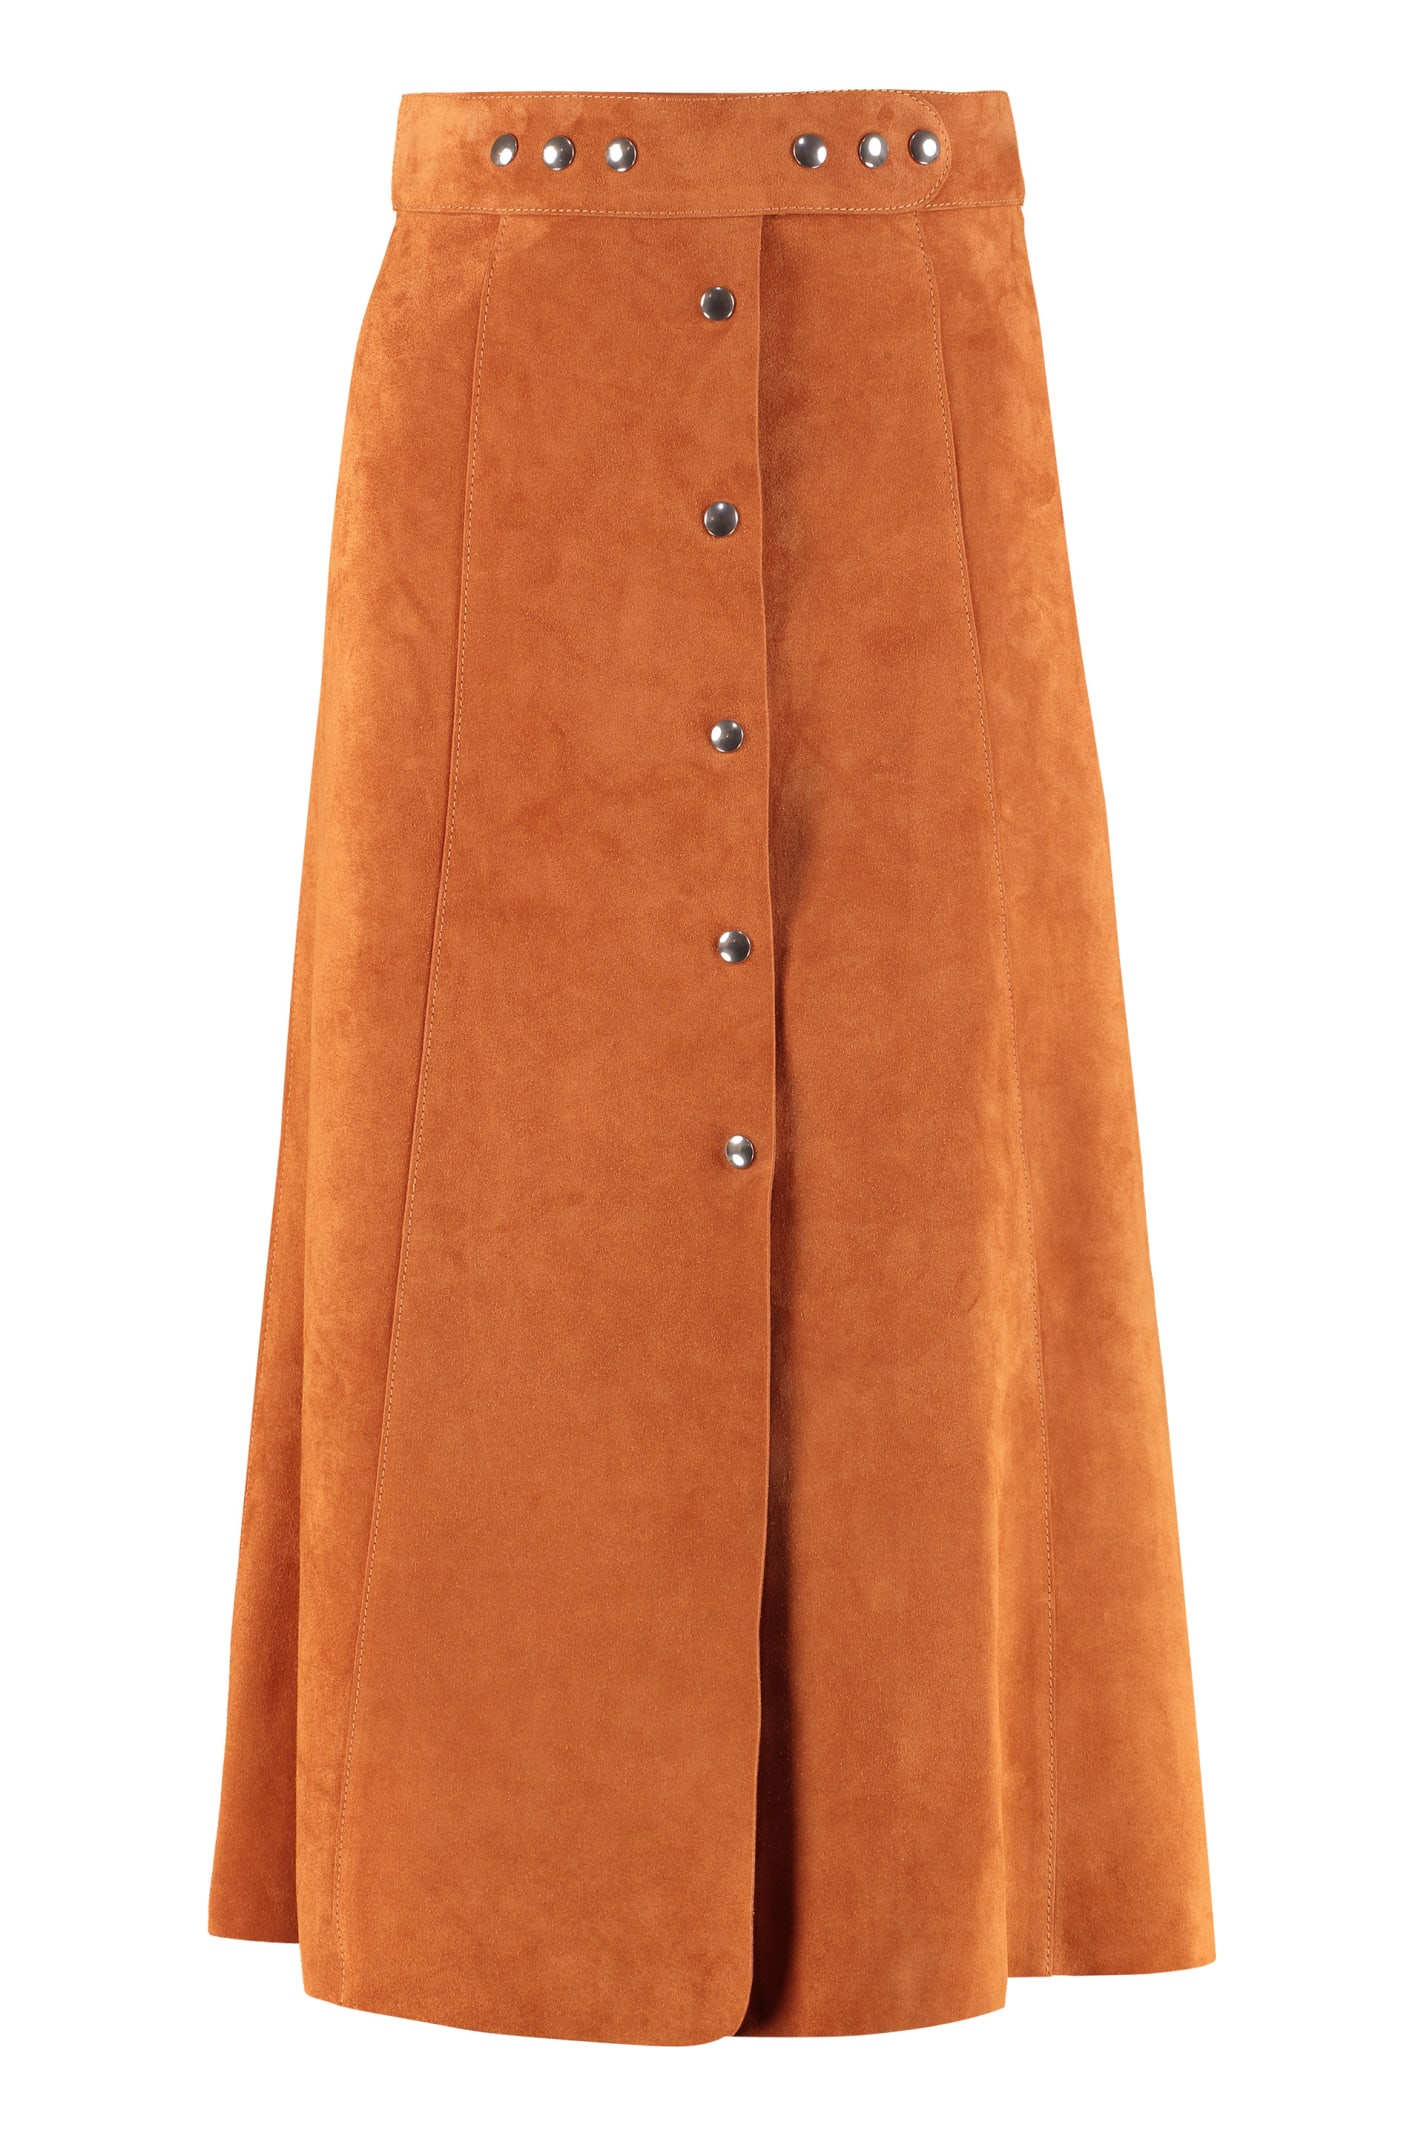 PRADA FLARED SKIRT WITH BUTTONS,51751054 F0588